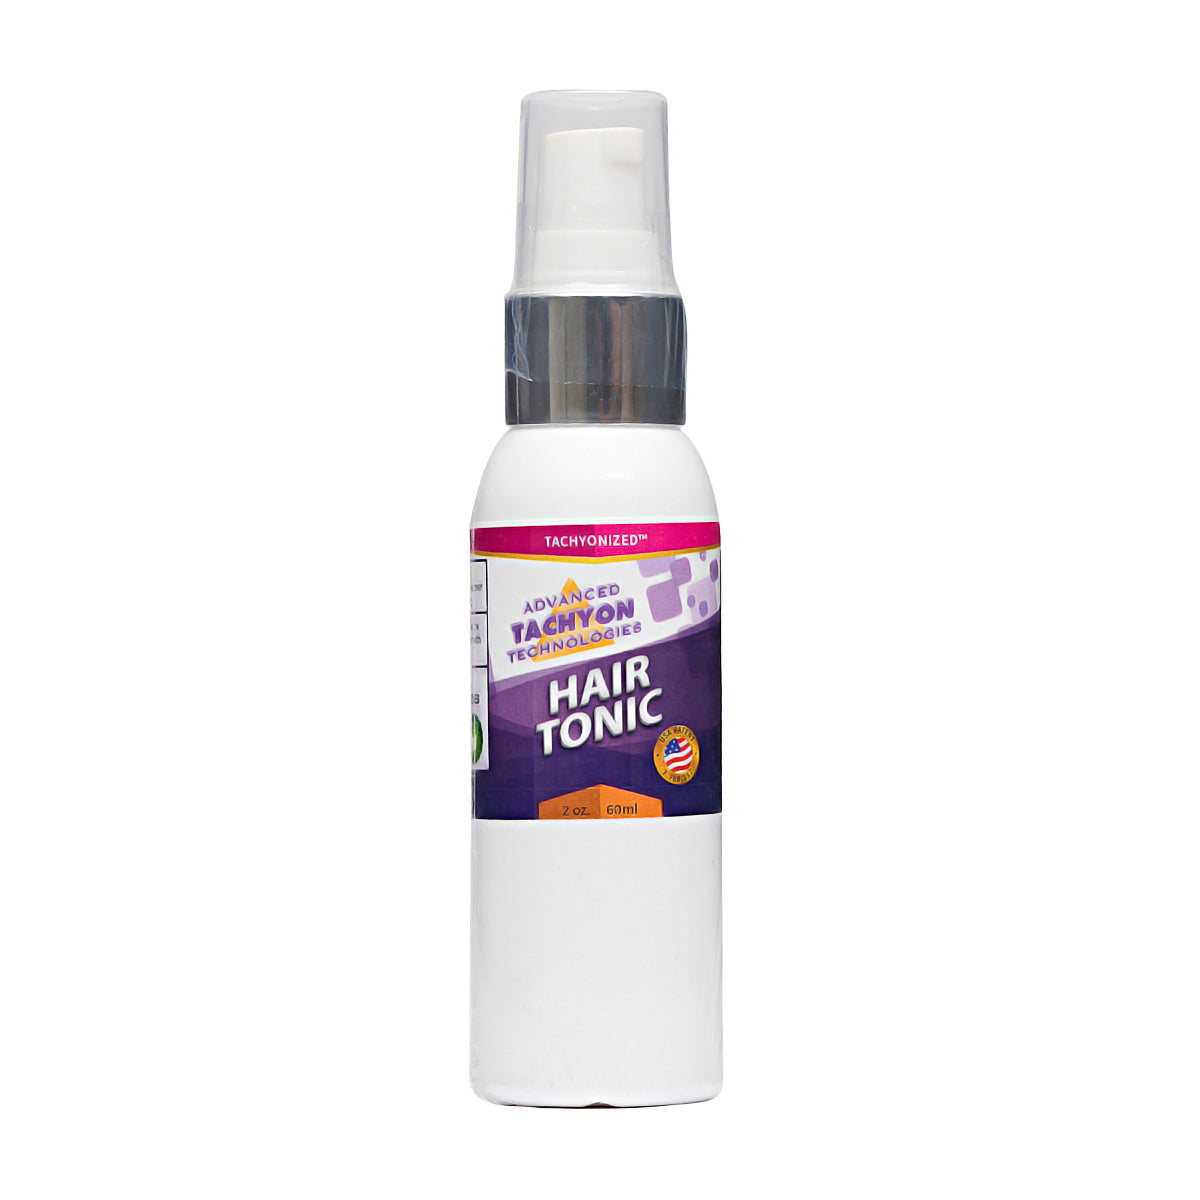 Hair Tonic | ATT Tachyon| Raw Living UK | Healthy Hair | Advanced Tachyon Technologies Tachyonized Hair Tonic nourishes hair, and it promotes the growth of full-bodied, beautiful hair, and also repairs damaged tissue